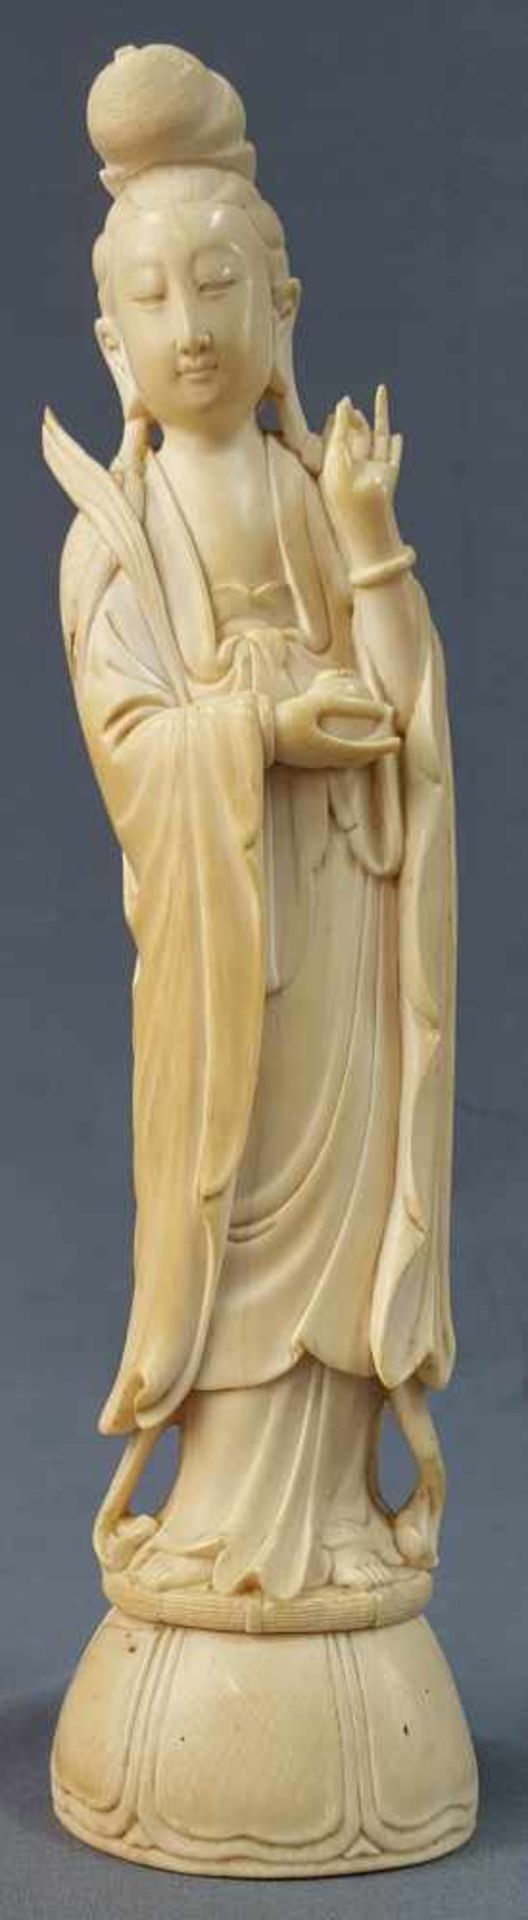 Lady with blessing hand and vessel. China / Japan. Ivory. Old, around 1920.